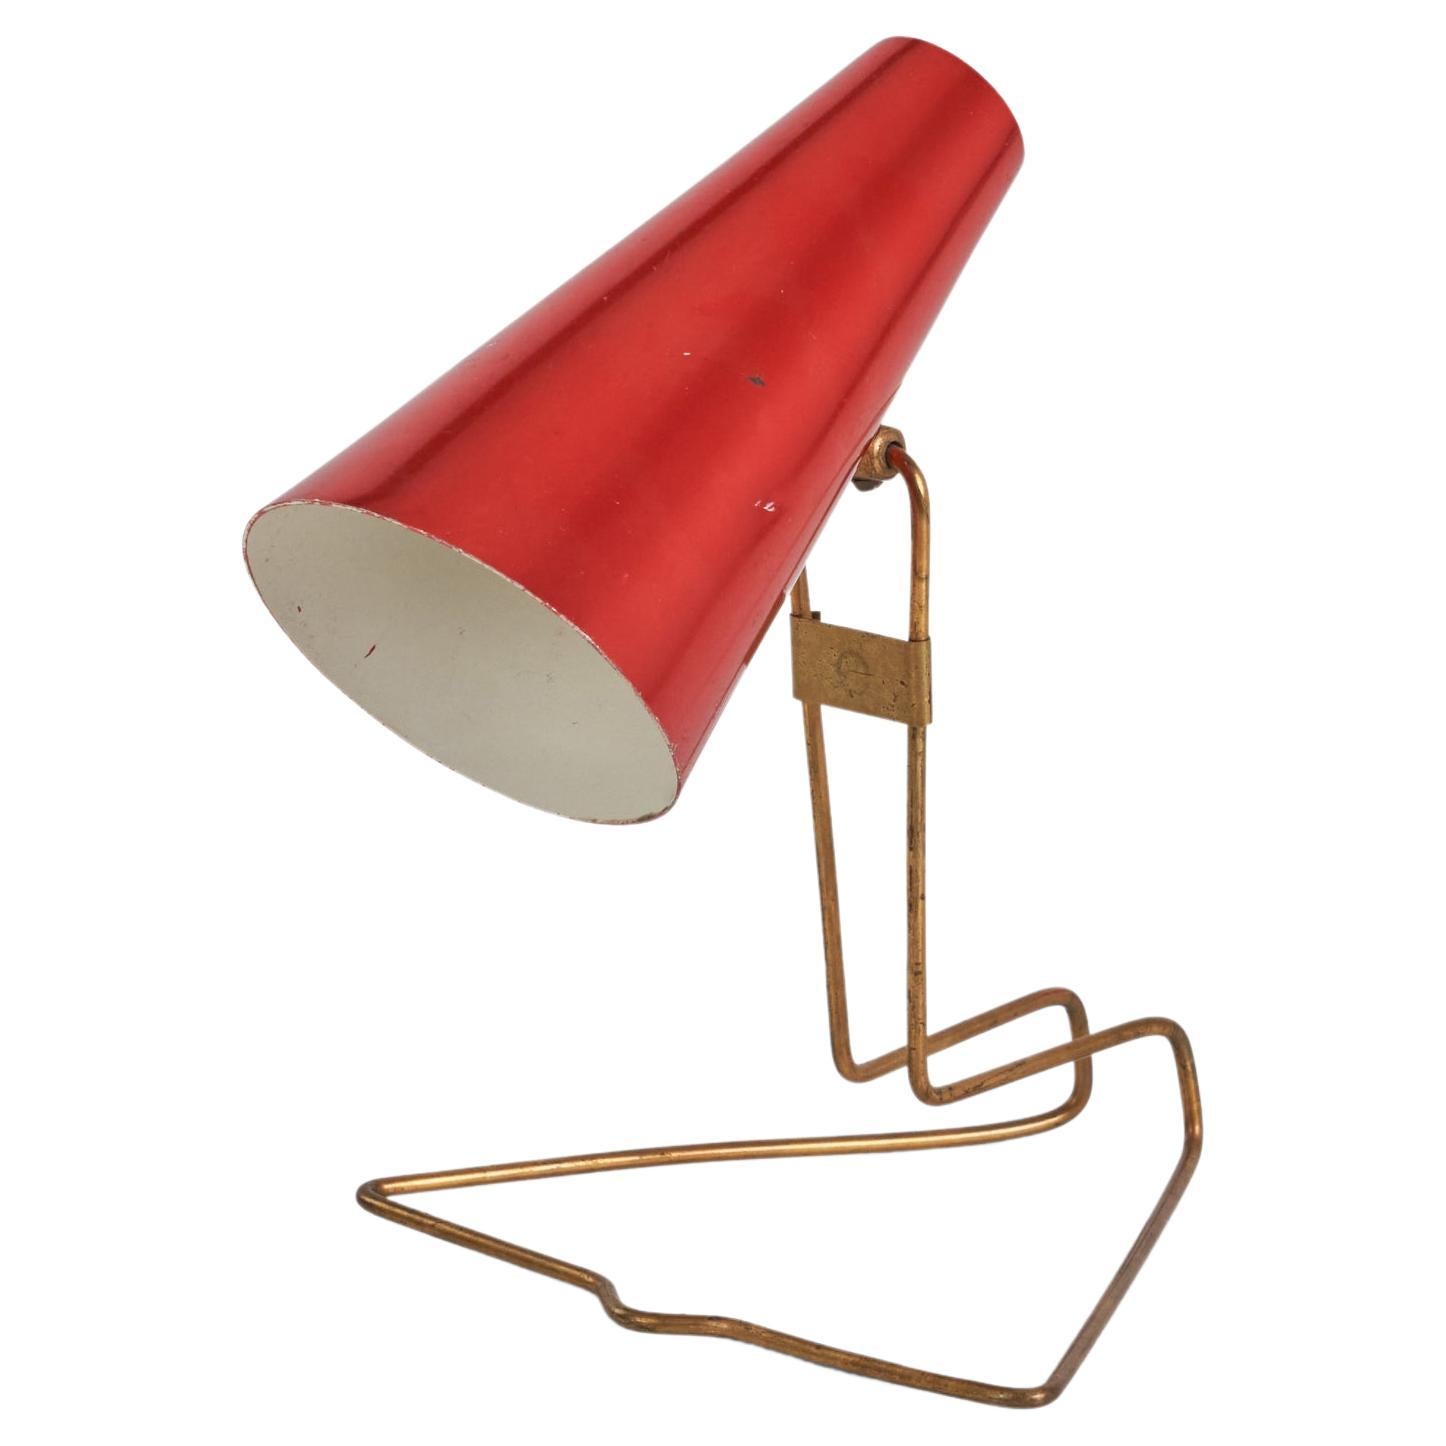 Idman Oy, Adjustable Table Lamp, Brass, Red-Lacquered Metal, Finland, 1950s For Sale